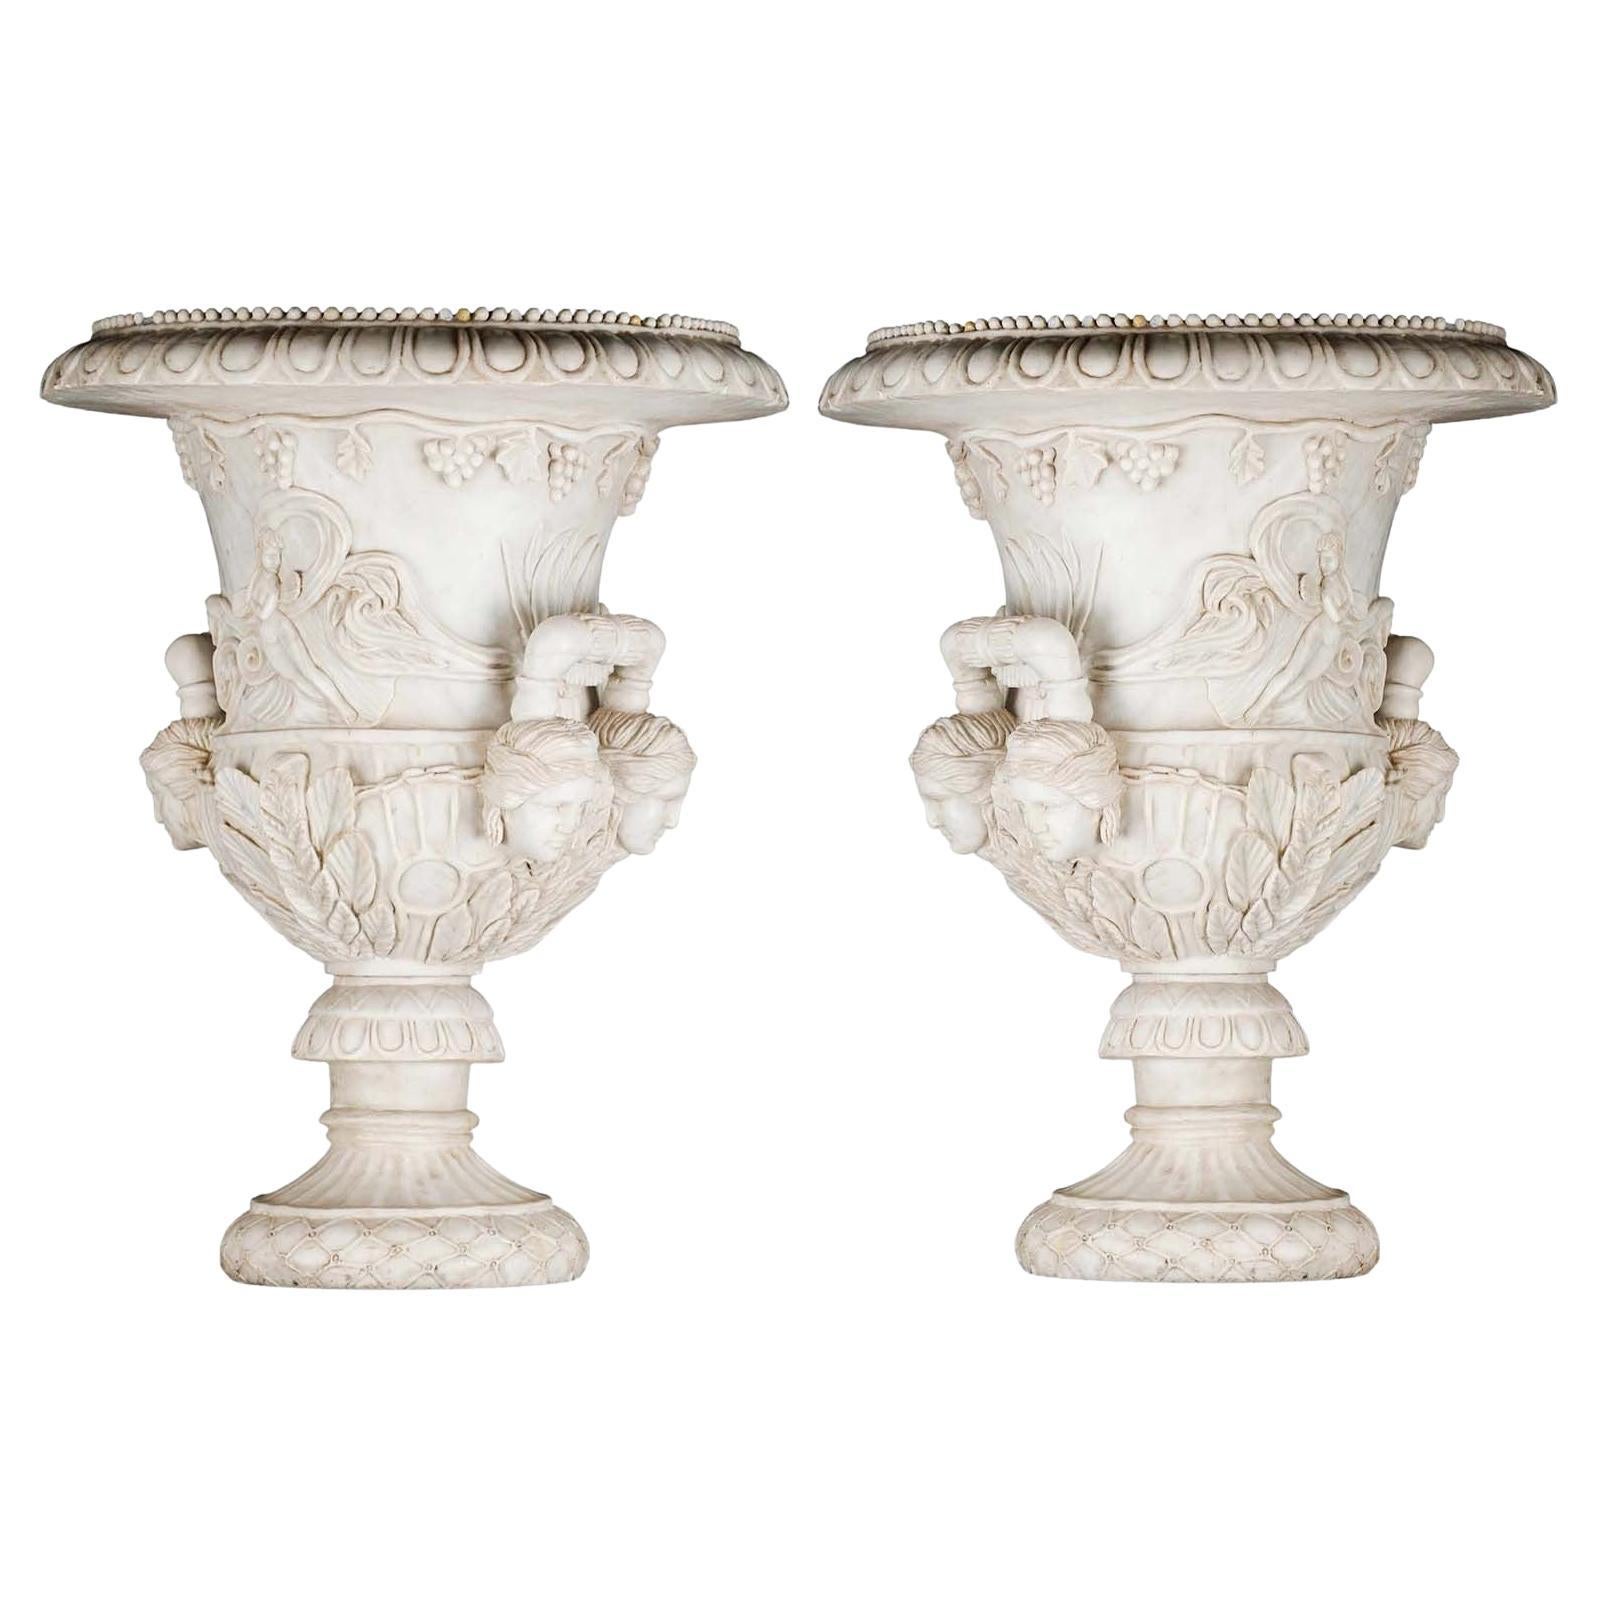 Pair of Italian Palatial Garden Urns/Medici Vases with Carved Marble For Sale